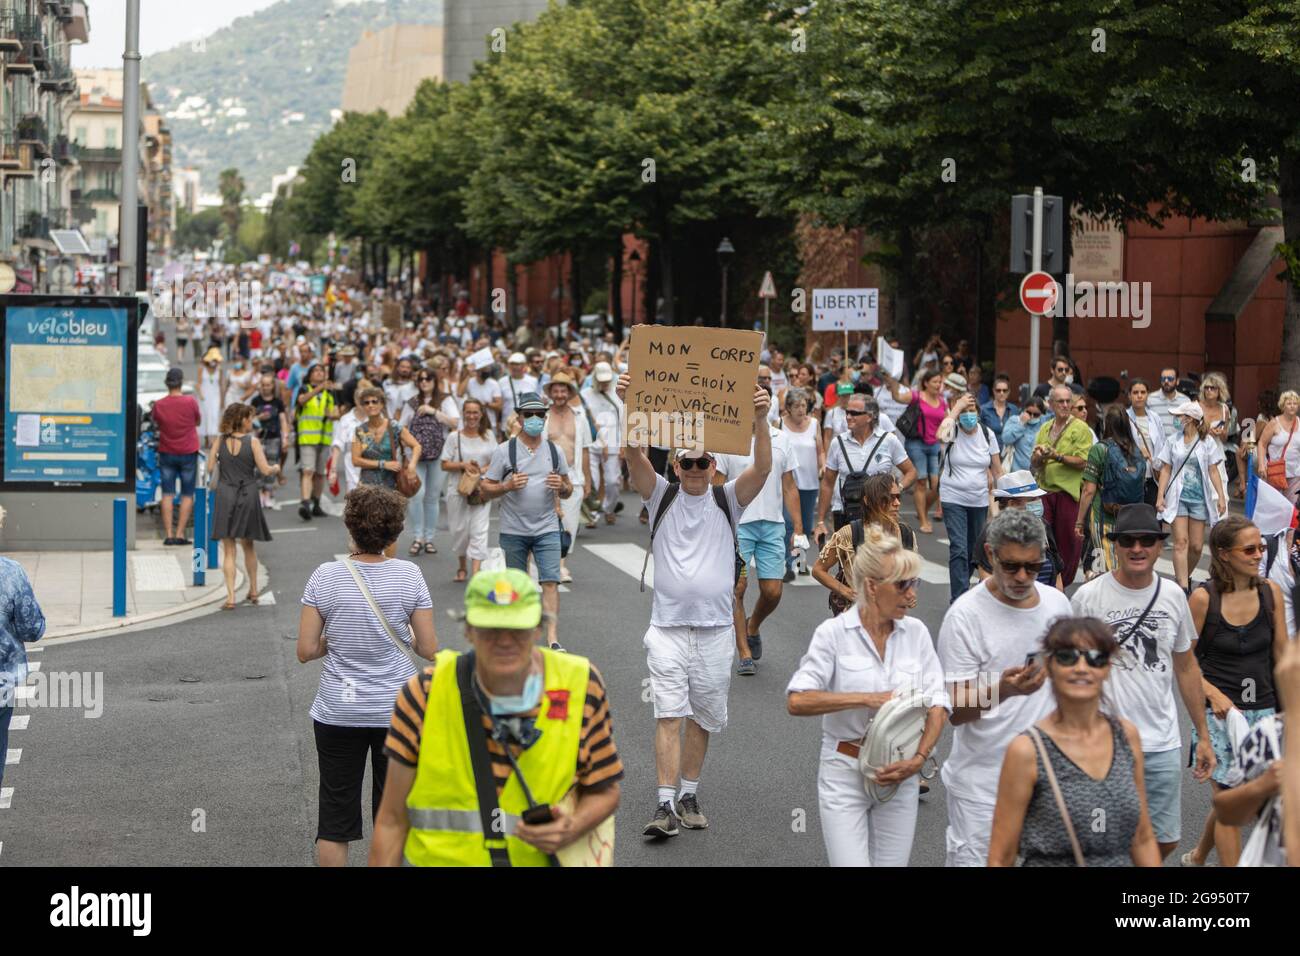 Thousands of demonstrators march through the streets of Nice to protest against the health pass, on July 24, 2021, in Nice, France. Since July 21, people wanting to go to in most public spaces in France have to show a proof of Covid-19 vaccination or a negative test, as the country braces for a feared spike in cases from the highly transmissible Covid-19 Delta variant. Photo by Lucie Choquet/ABACAPRESS.COM Stock Photo